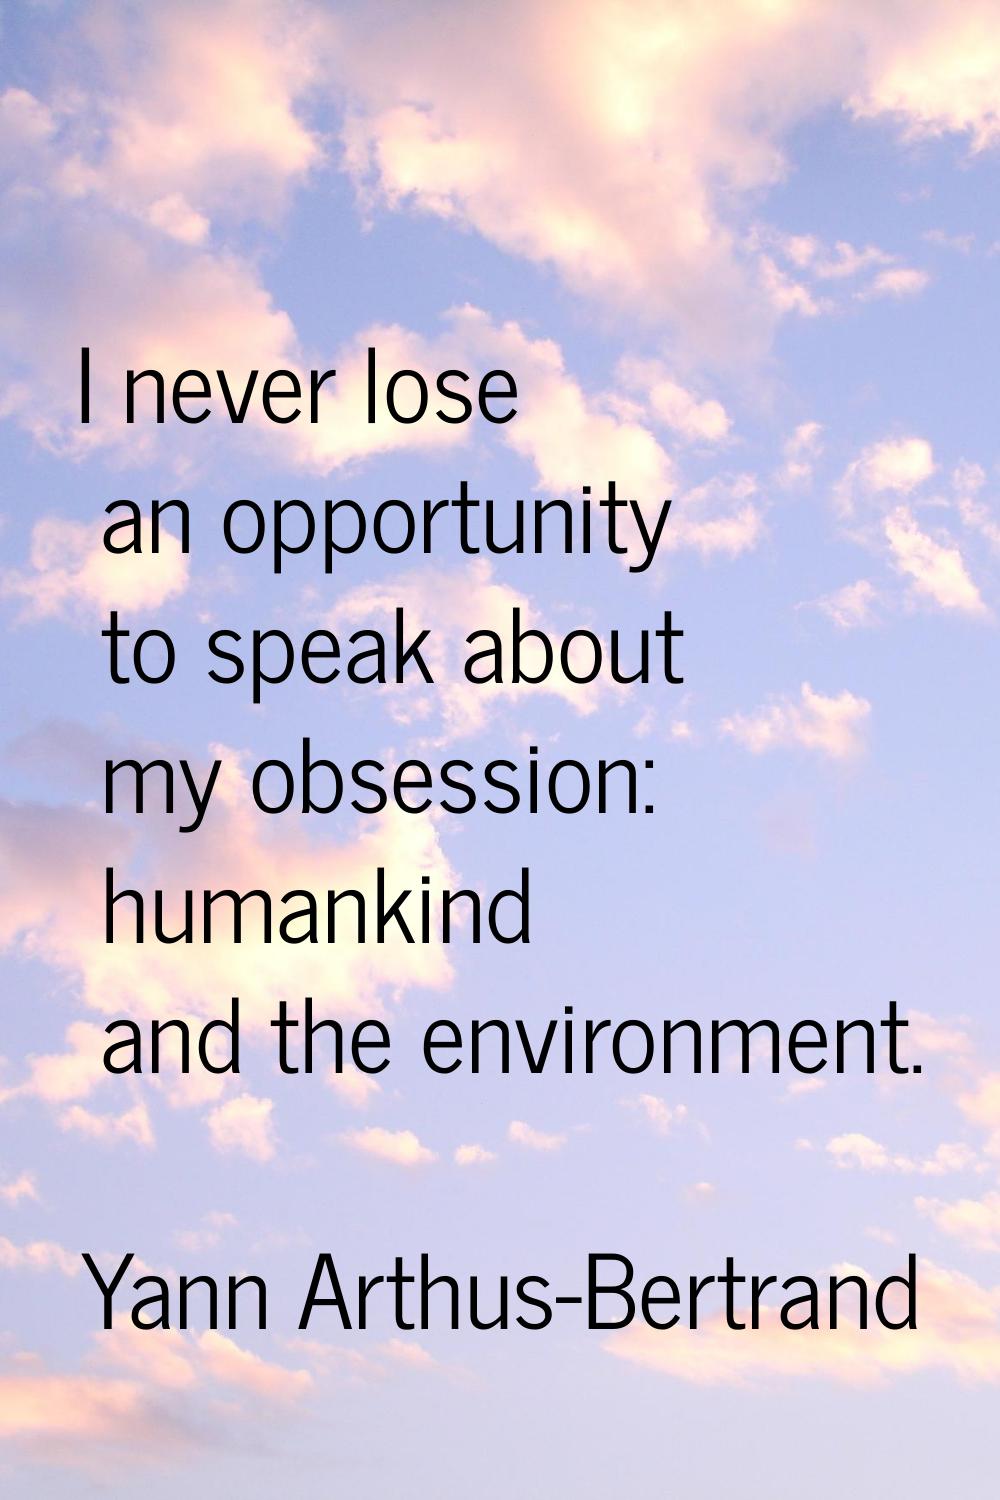 I never lose an opportunity to speak about my obsession: humankind and the environment.